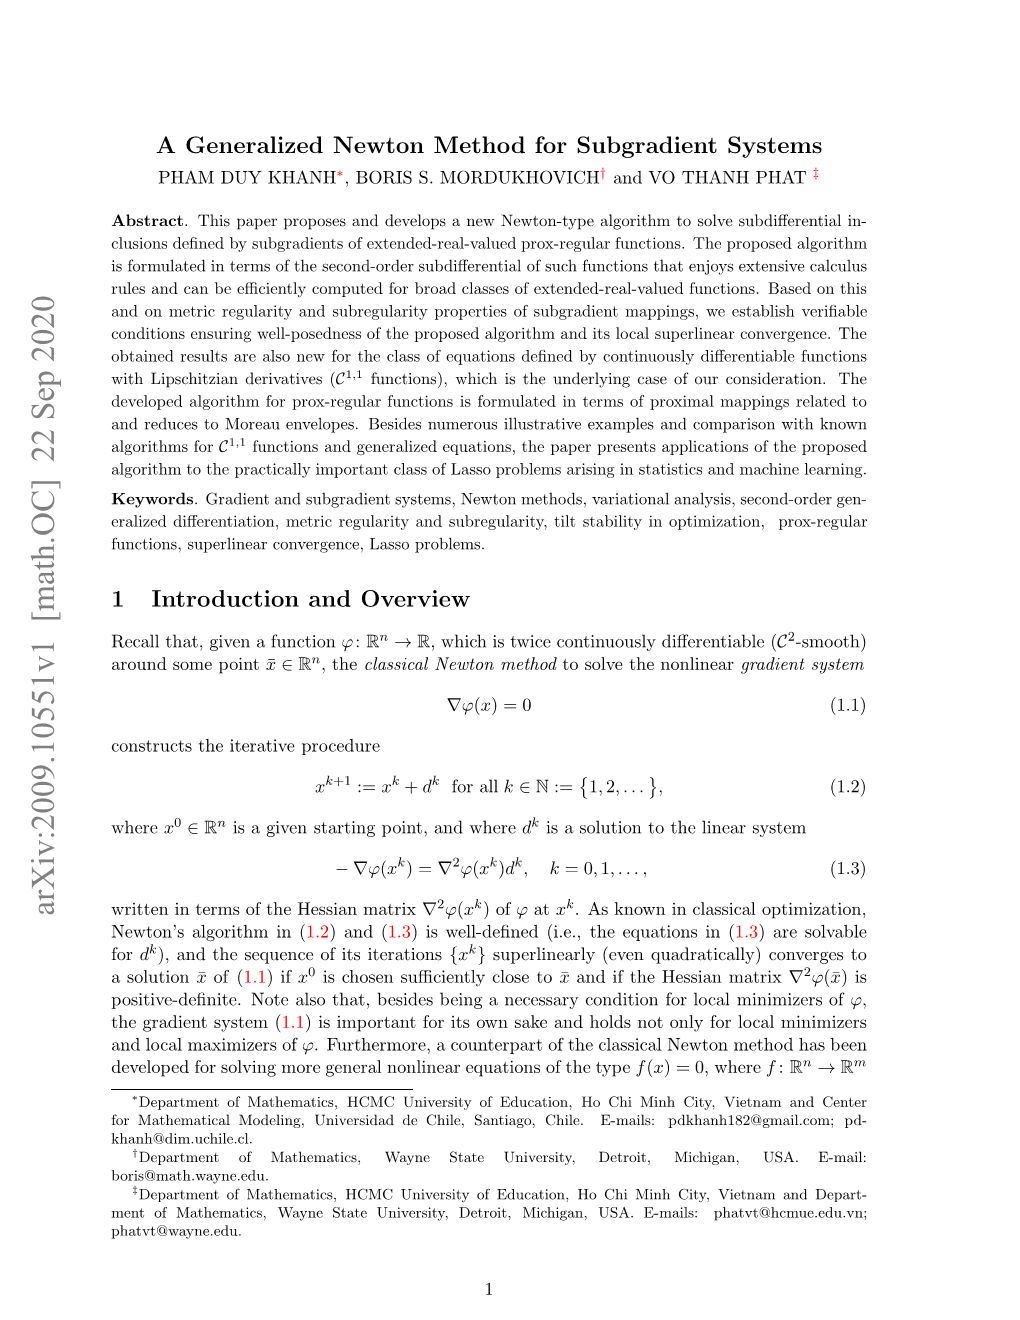 A Generalized Newton Method for Subgradient Systems